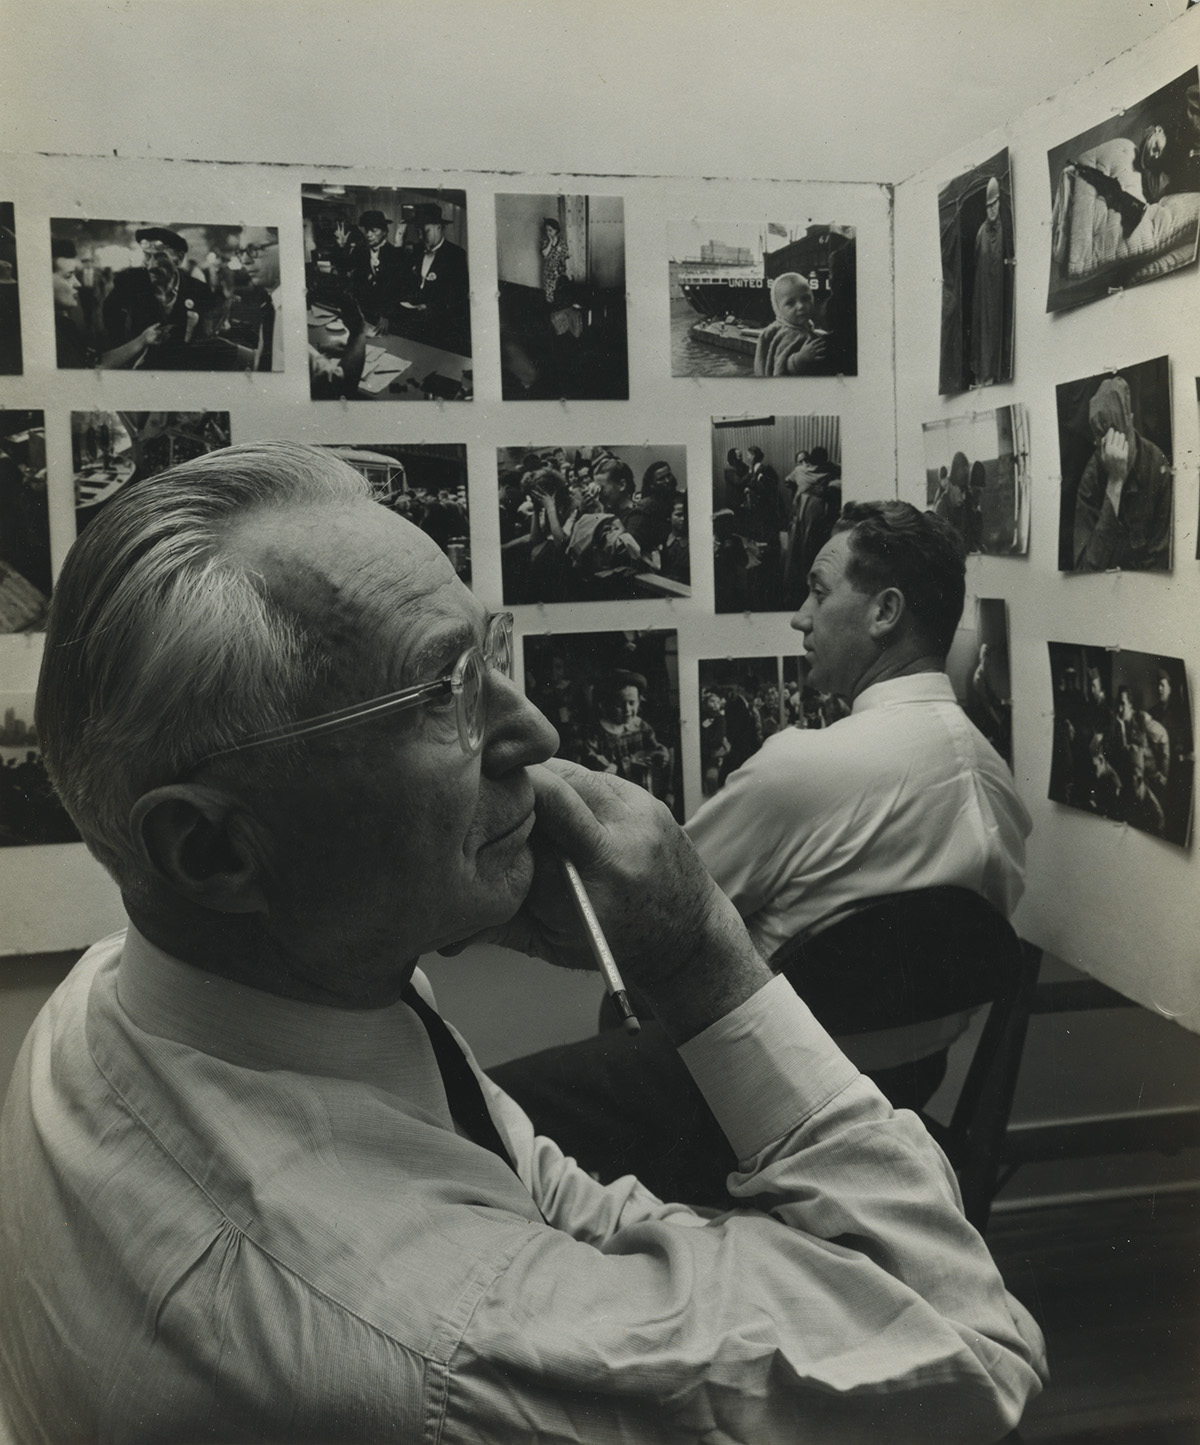 ARNOLD NEWMAN (1918-2006) Edward Steichen making selections for the The Family of Man publication at the Museum of Modern Art, New York